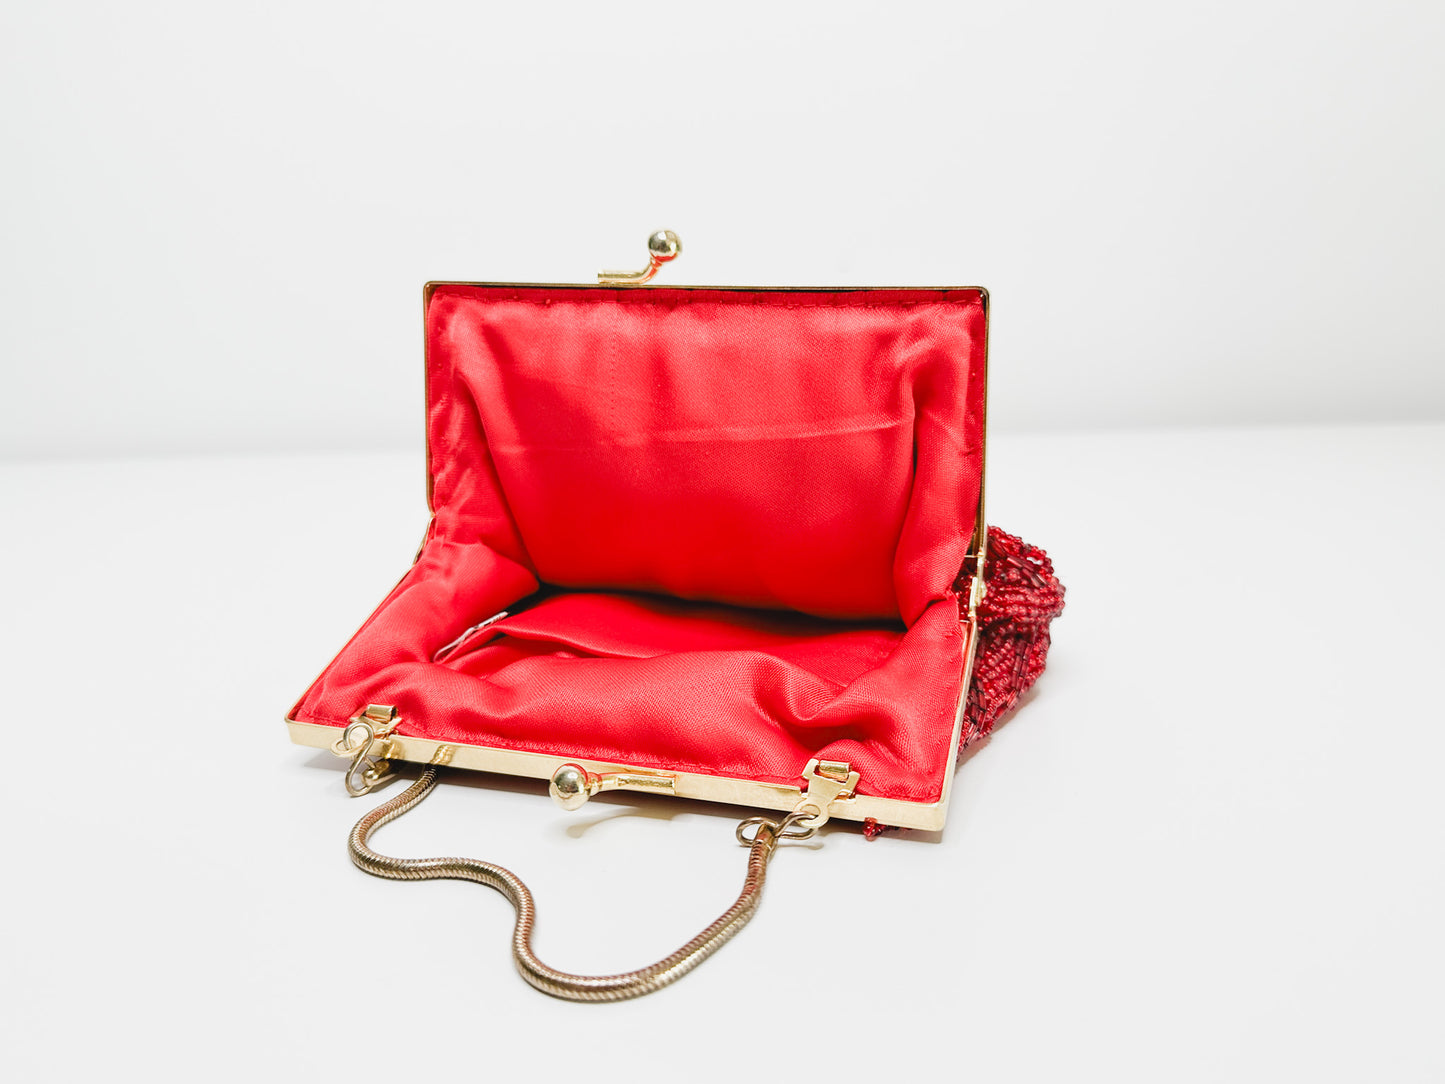 Red Beaded Shell Shaped Cocktail Purse with Gold Hardware